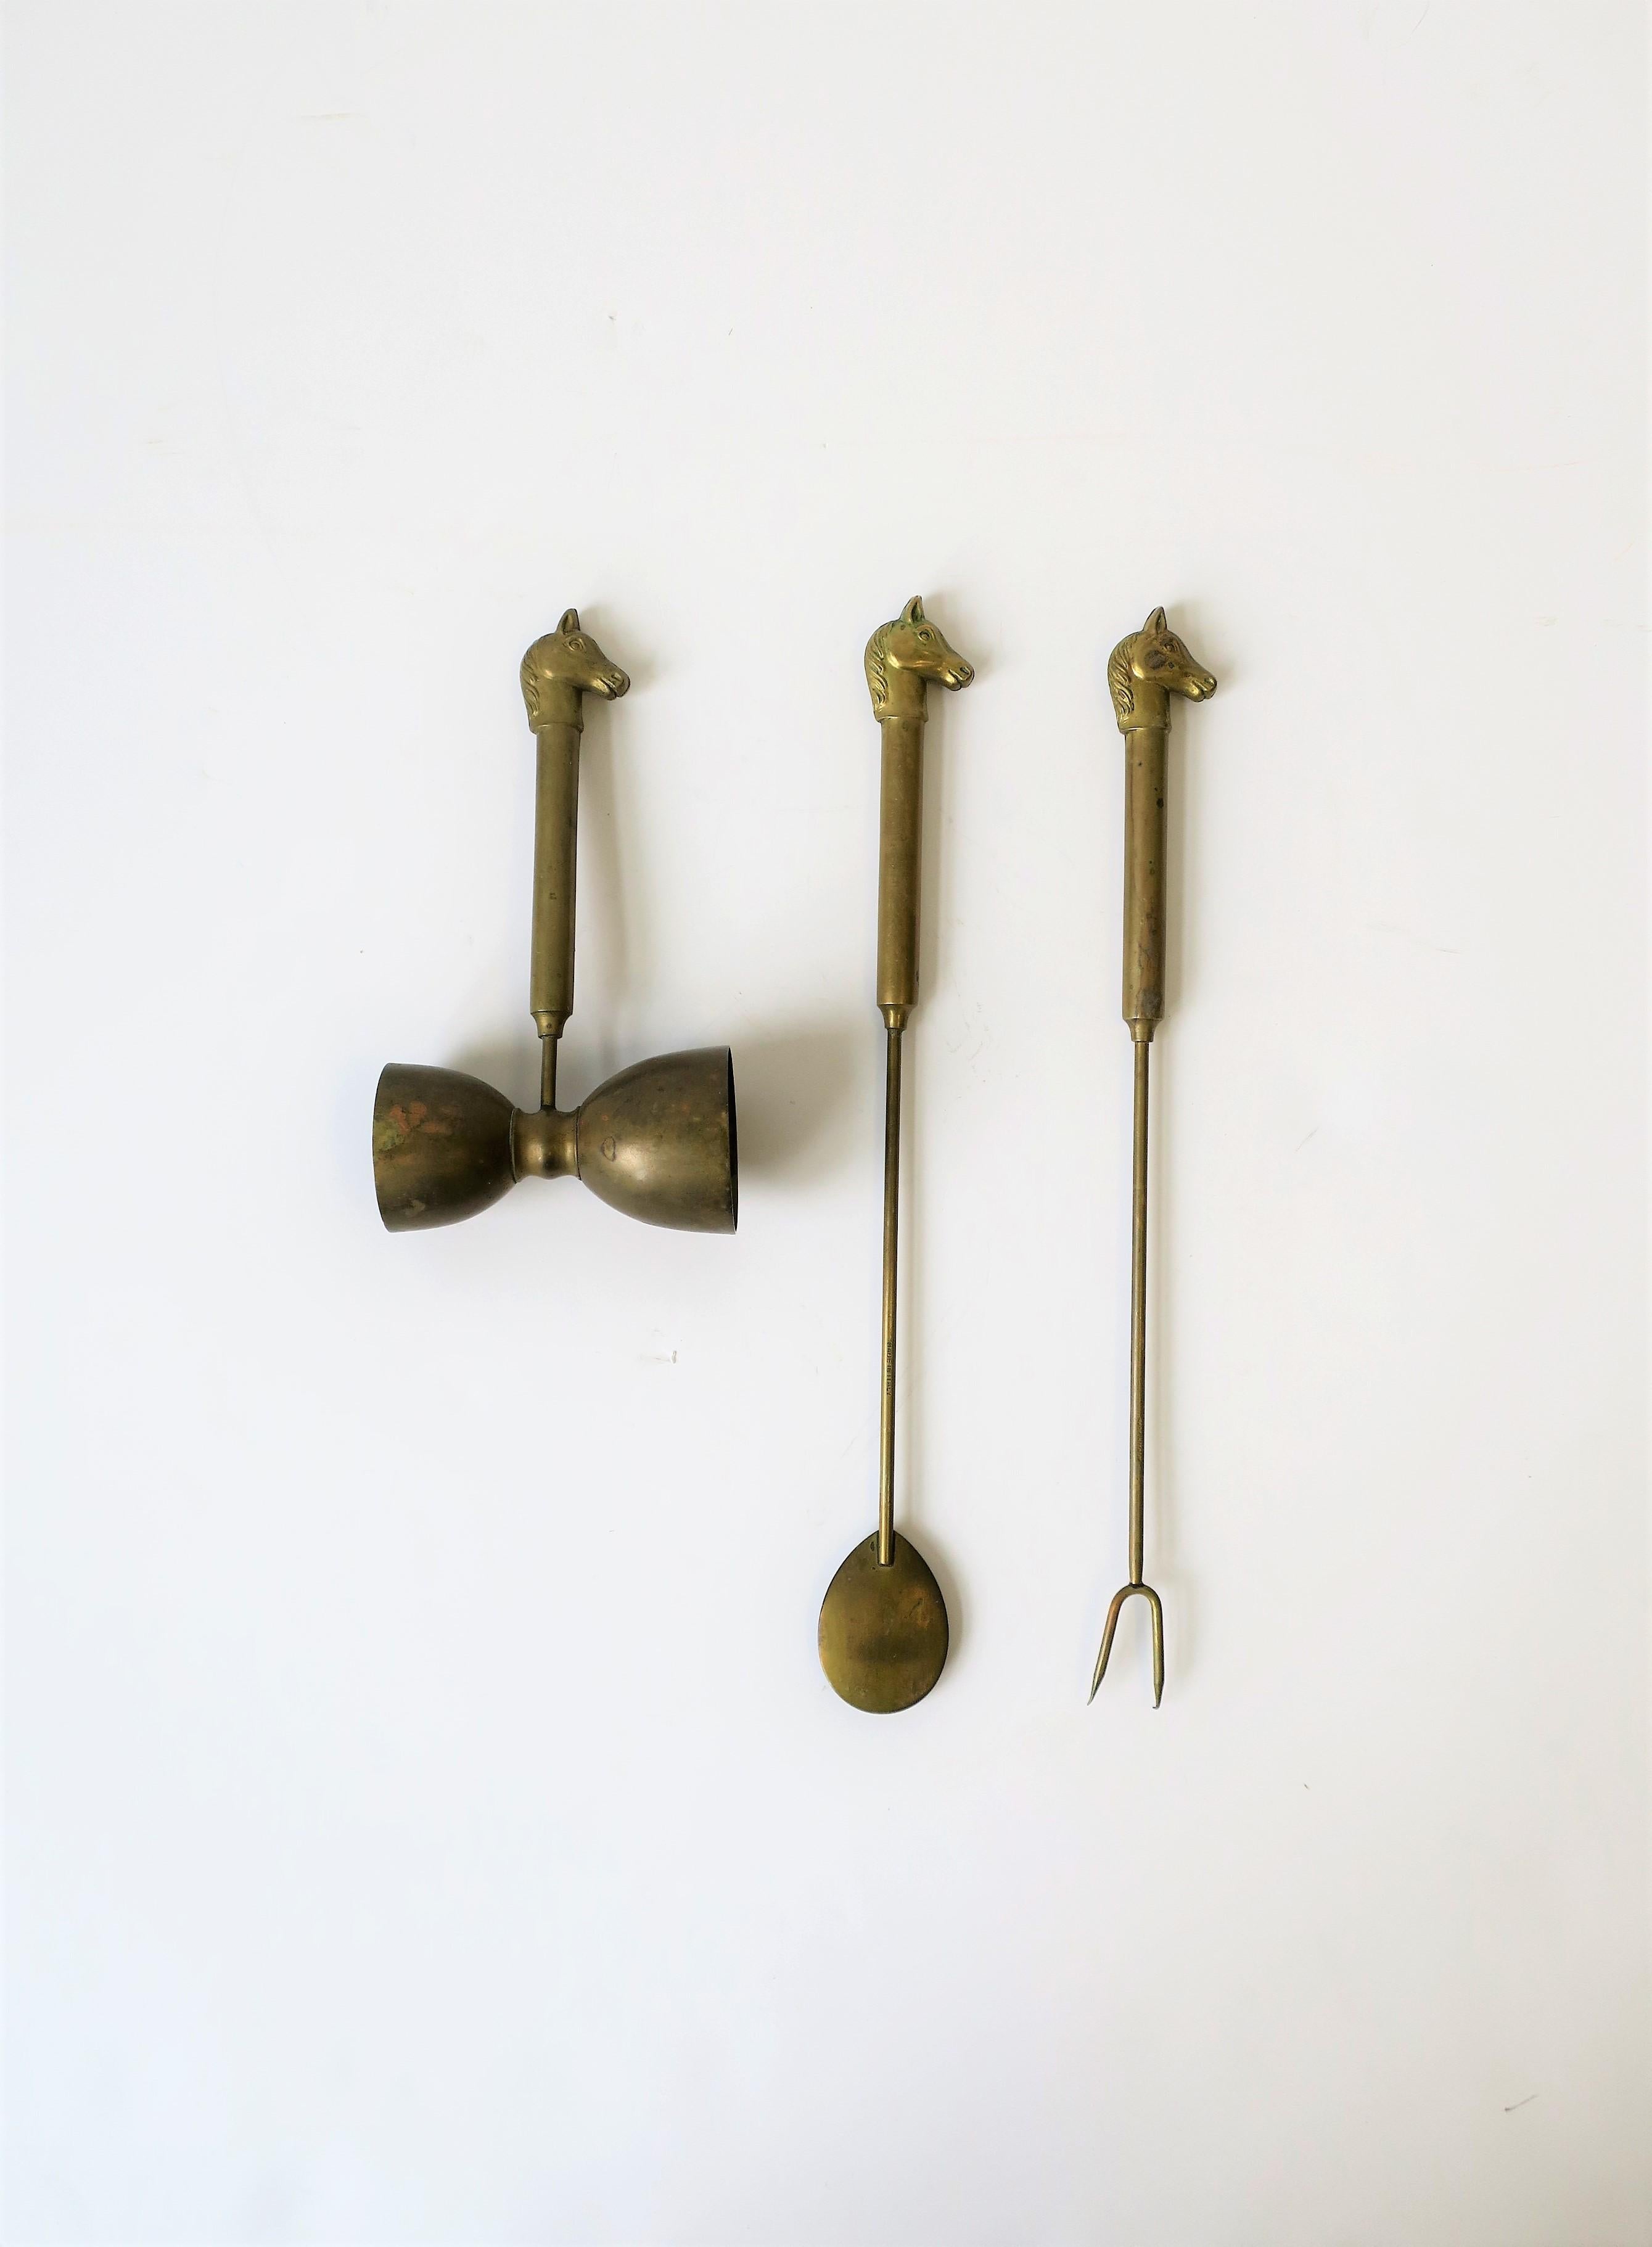 A substantial and well-made 3 piece set of Italian brass barware tools circa mid-20th century, Italy. This three (3) piece bartender tool set includes: a two-sided hourglass-shaped measuring device, aka as a jigger or shot glass, and olive, onion,